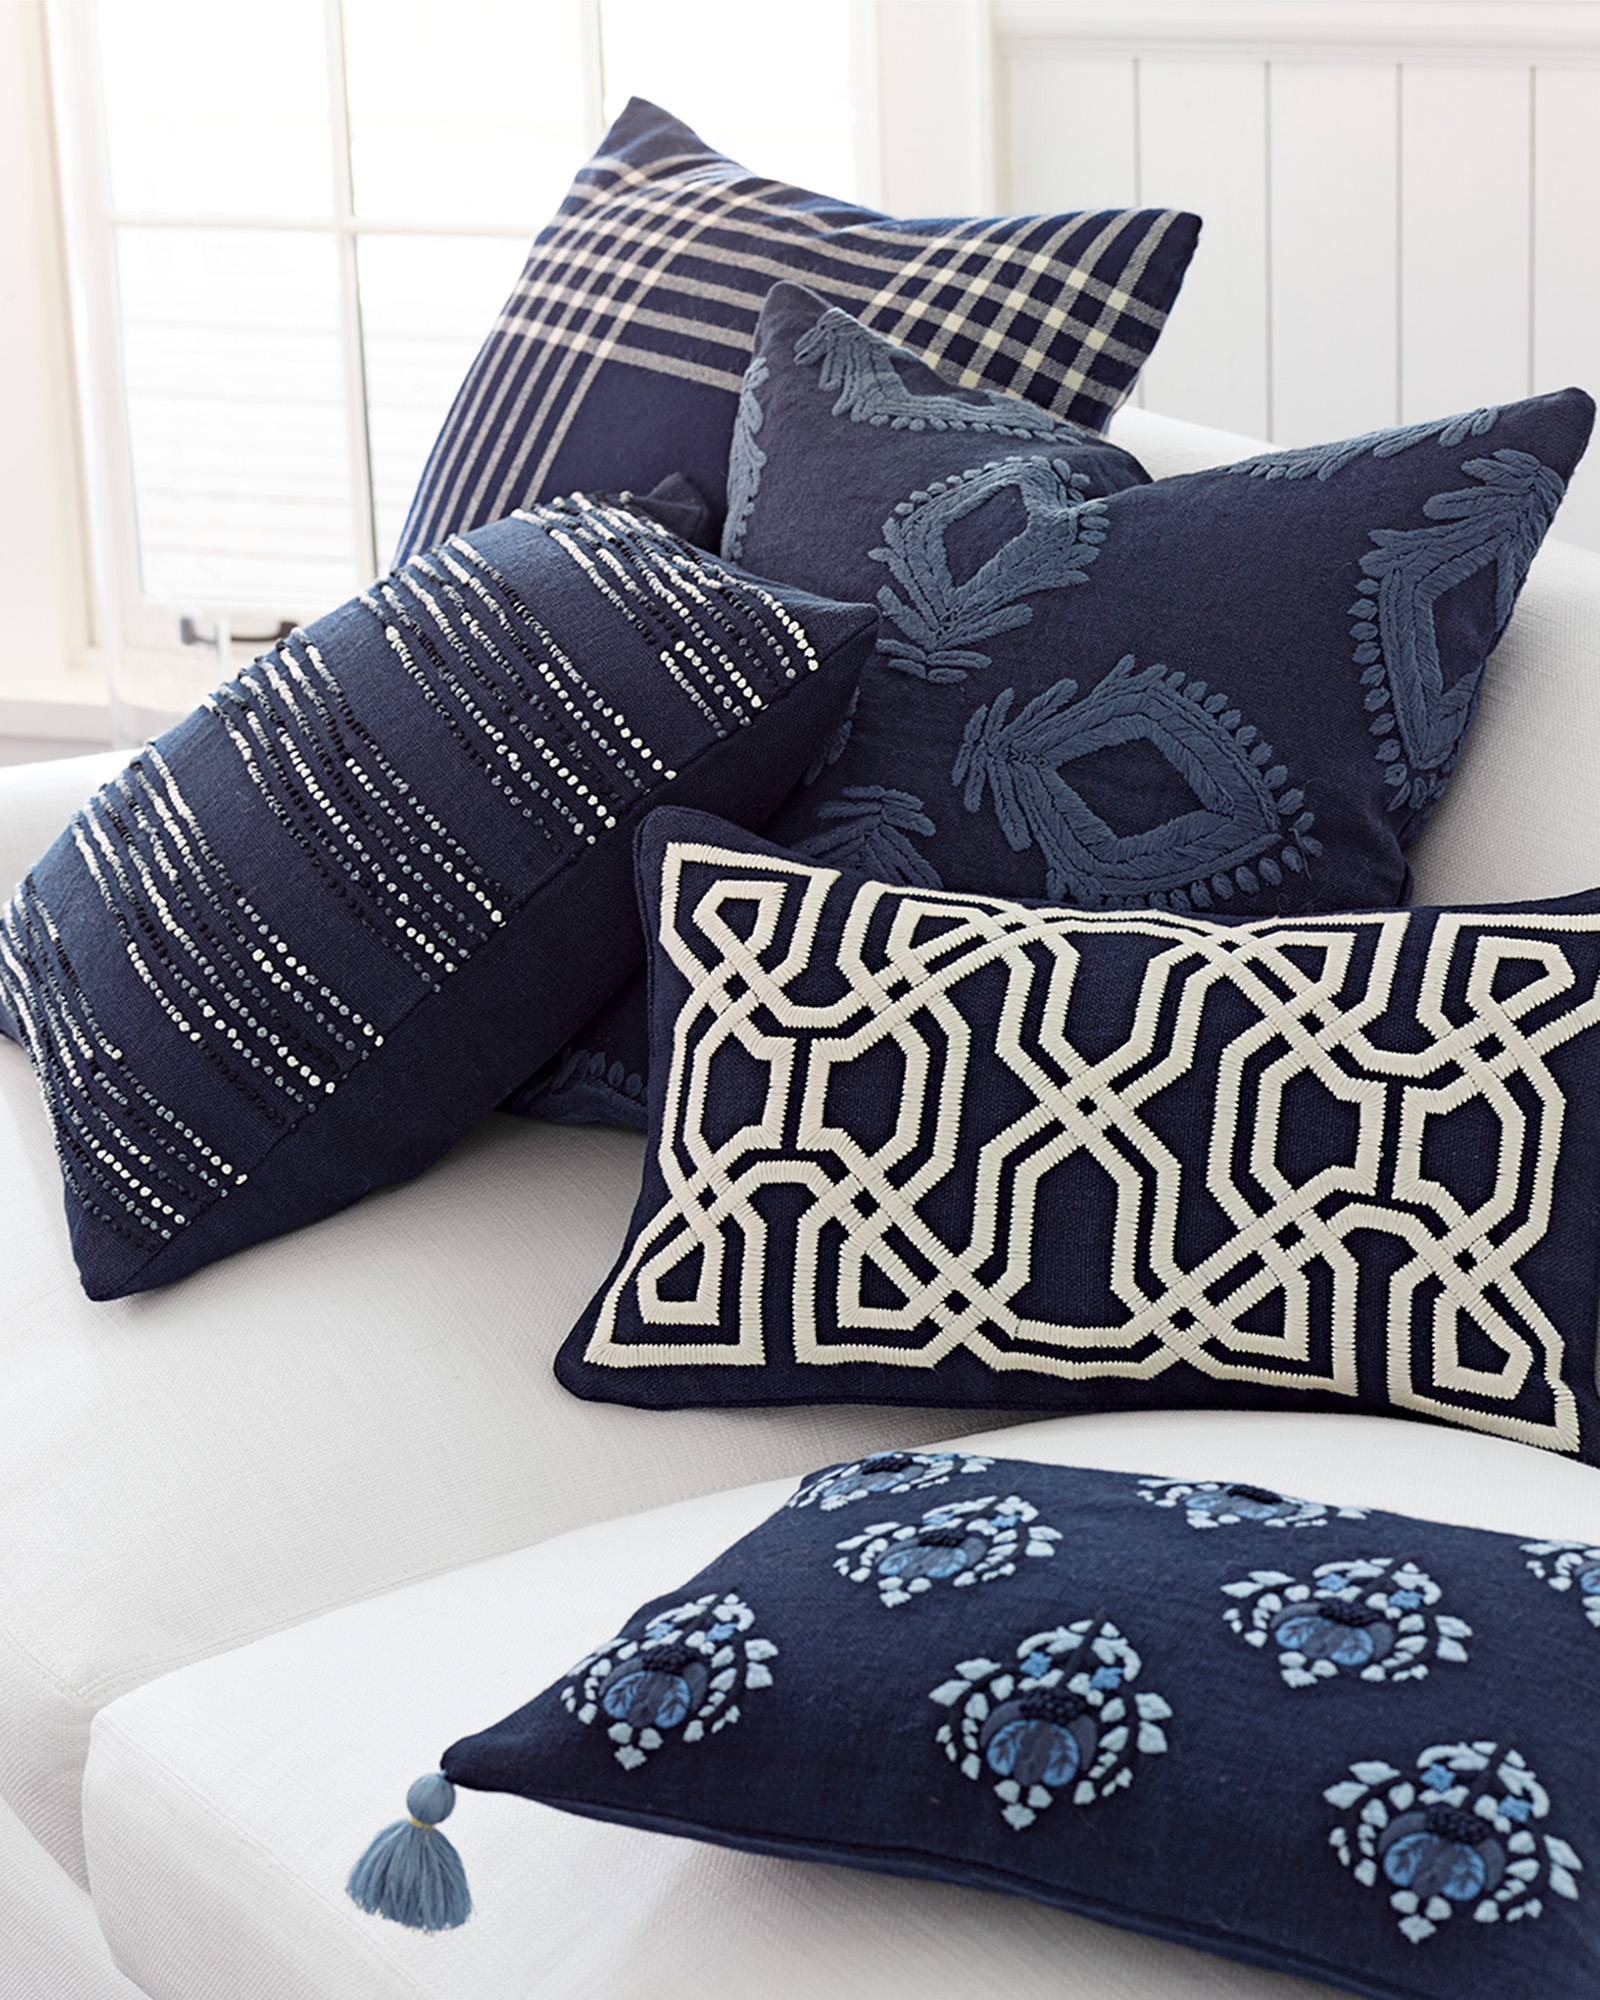 Kemp 12" x 21" Pillow Cover - Navy - Insert sold separately - Image 2